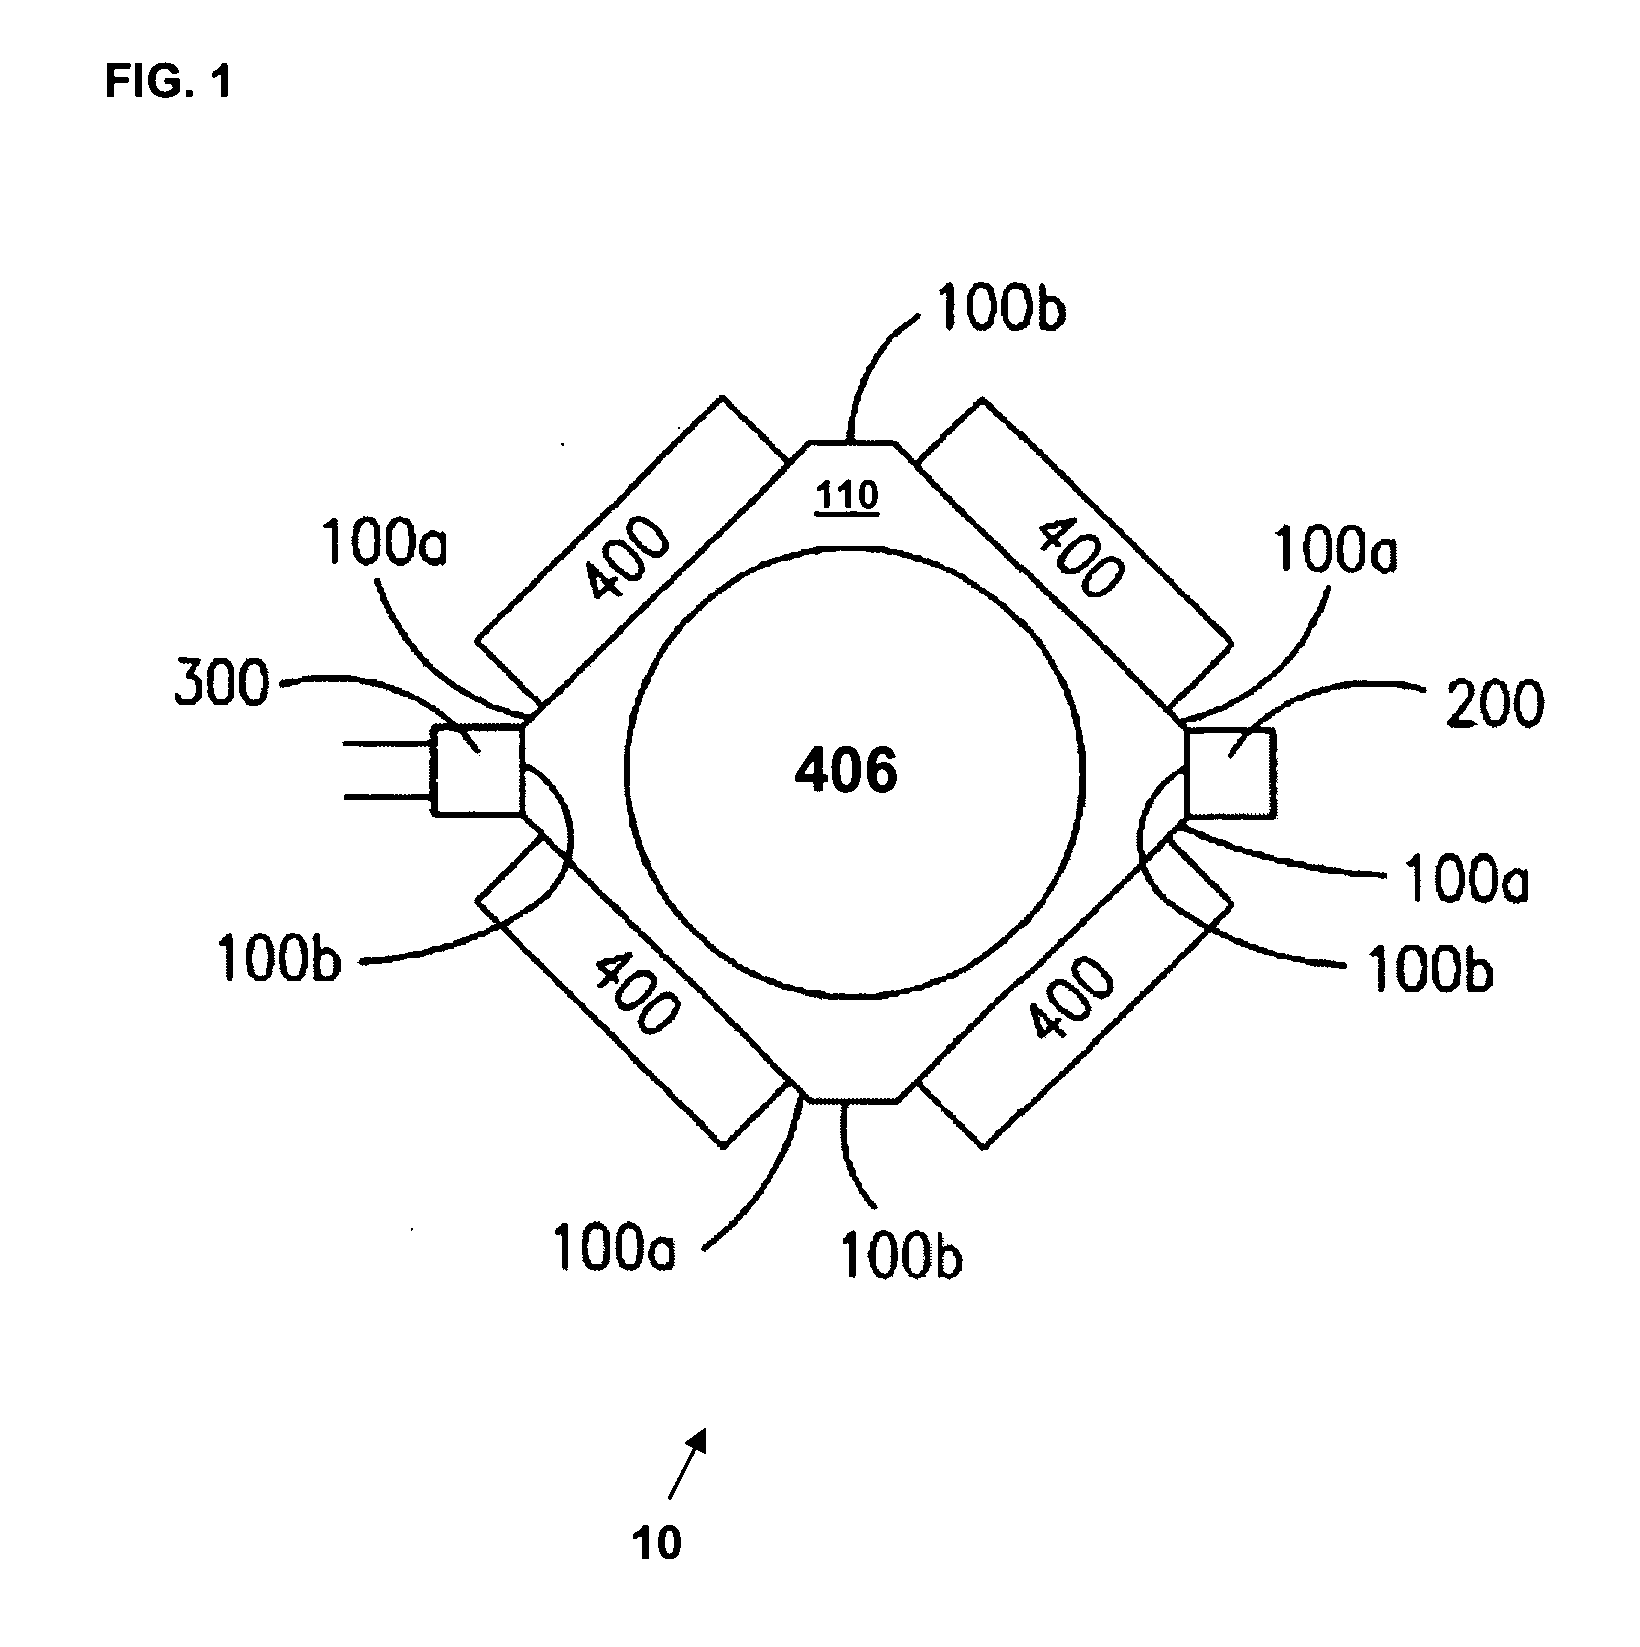 Substrate carrier for parallel wafer processing reactor